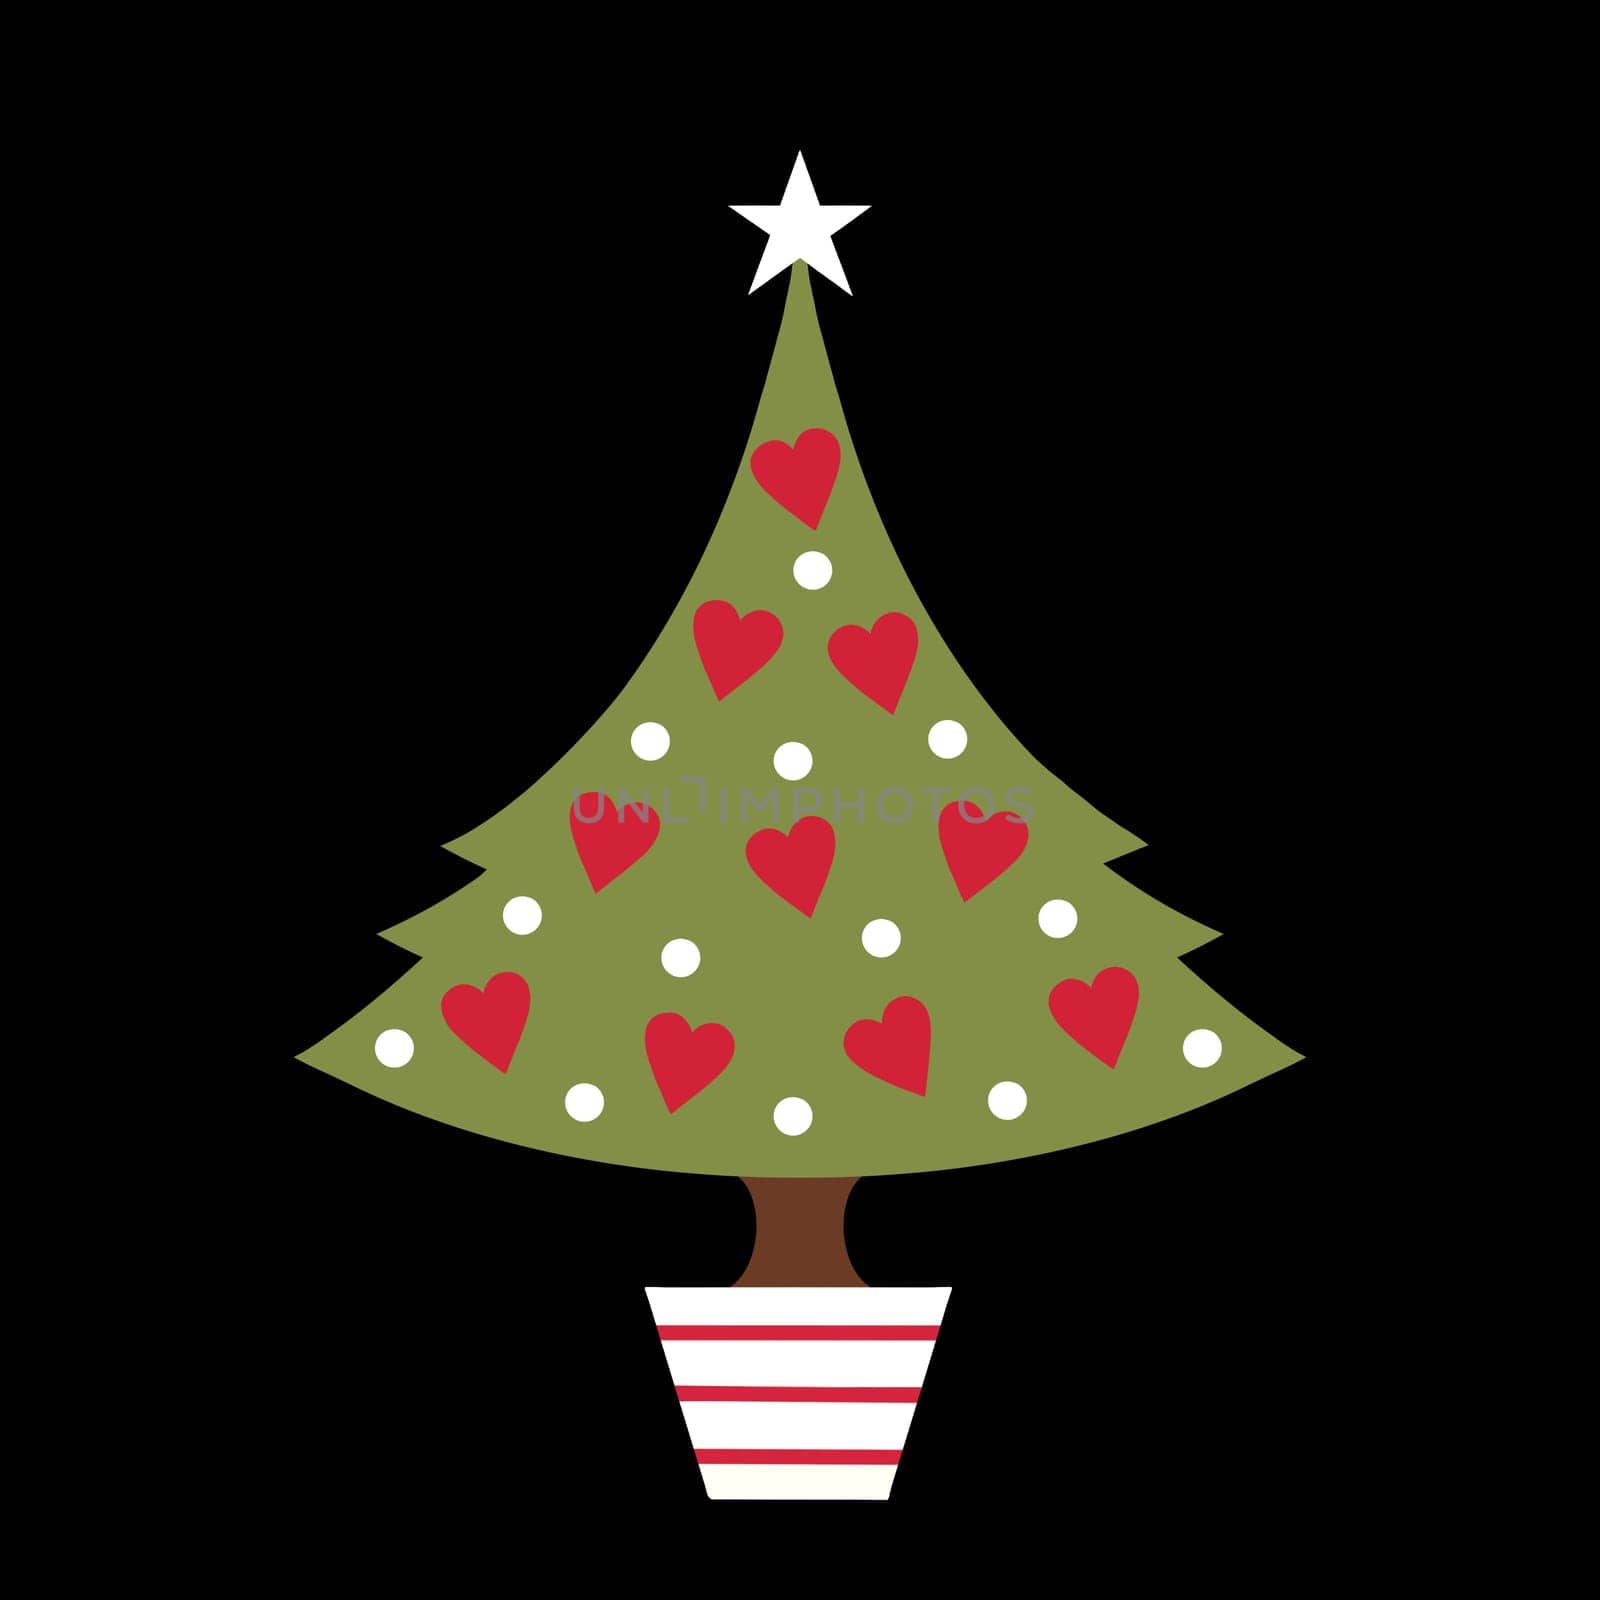 Modern Christmas tree design by RusticPuffin